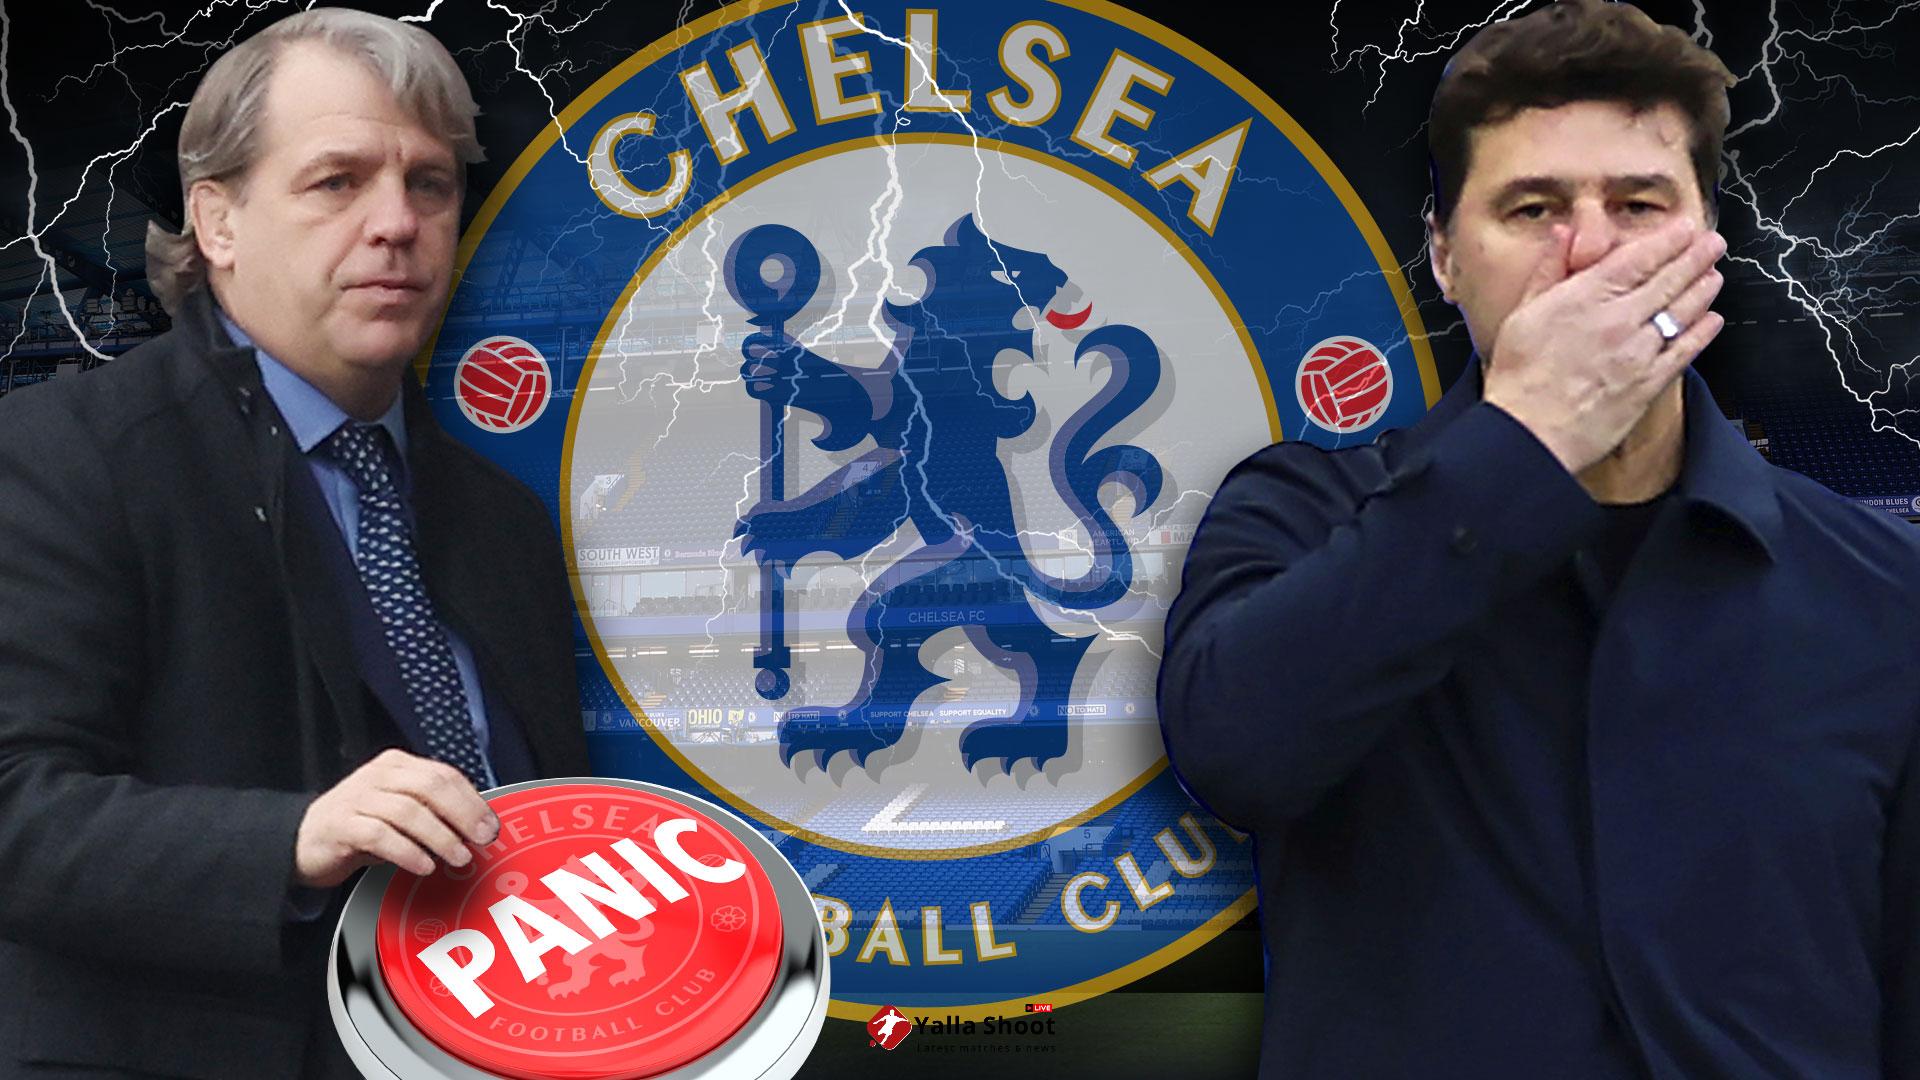 Chelsea still backing Pochettino despite Jose Mourinho waiting in wings but chiefs demand club qualify for Europe